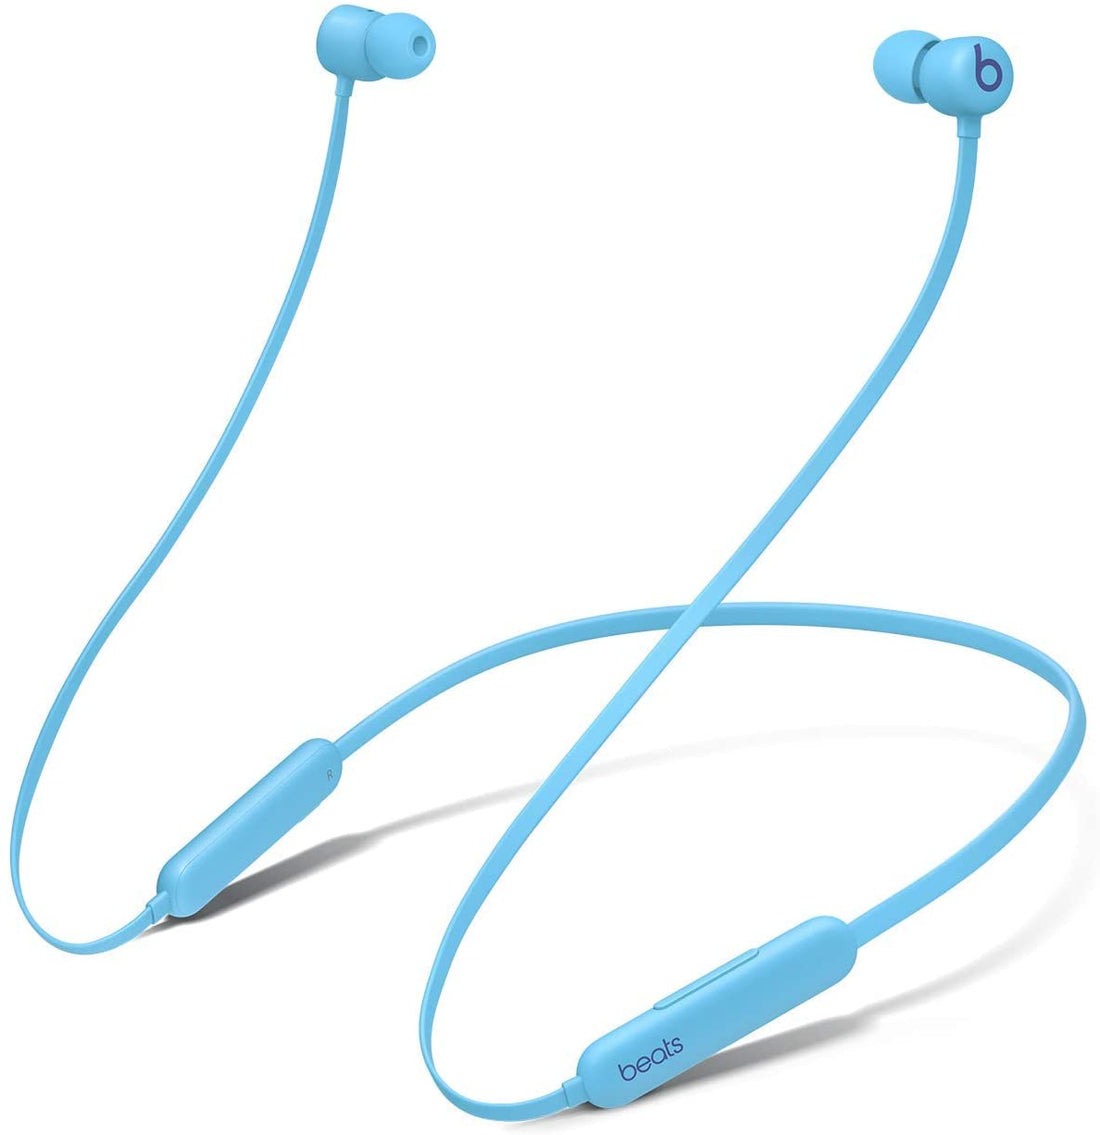 Beats Flex Wireless Portable Bluetooth Earbuds Built-in Microphone - Flame Blue (Certified Refurbished)